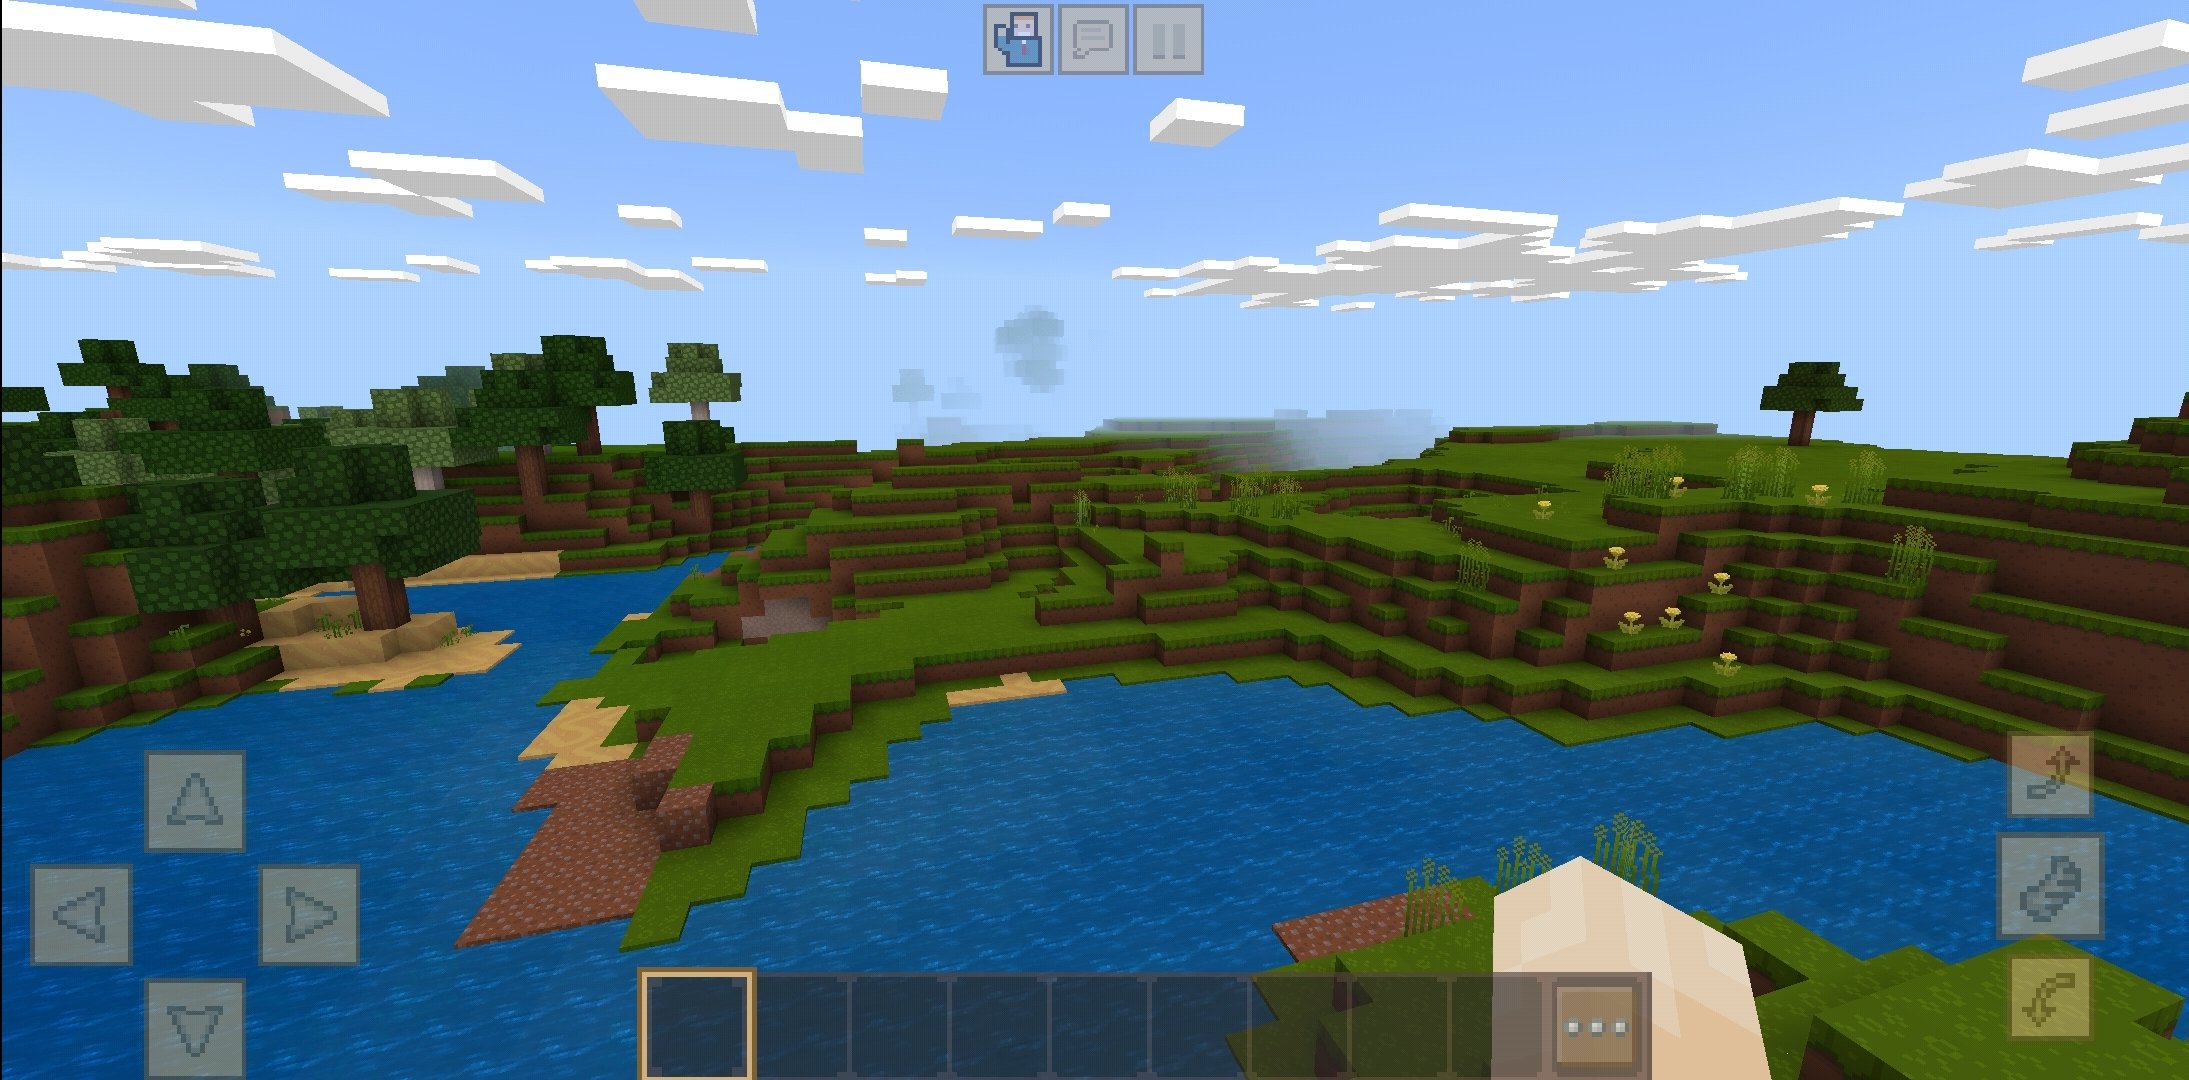 crafting and building 1.11 apk